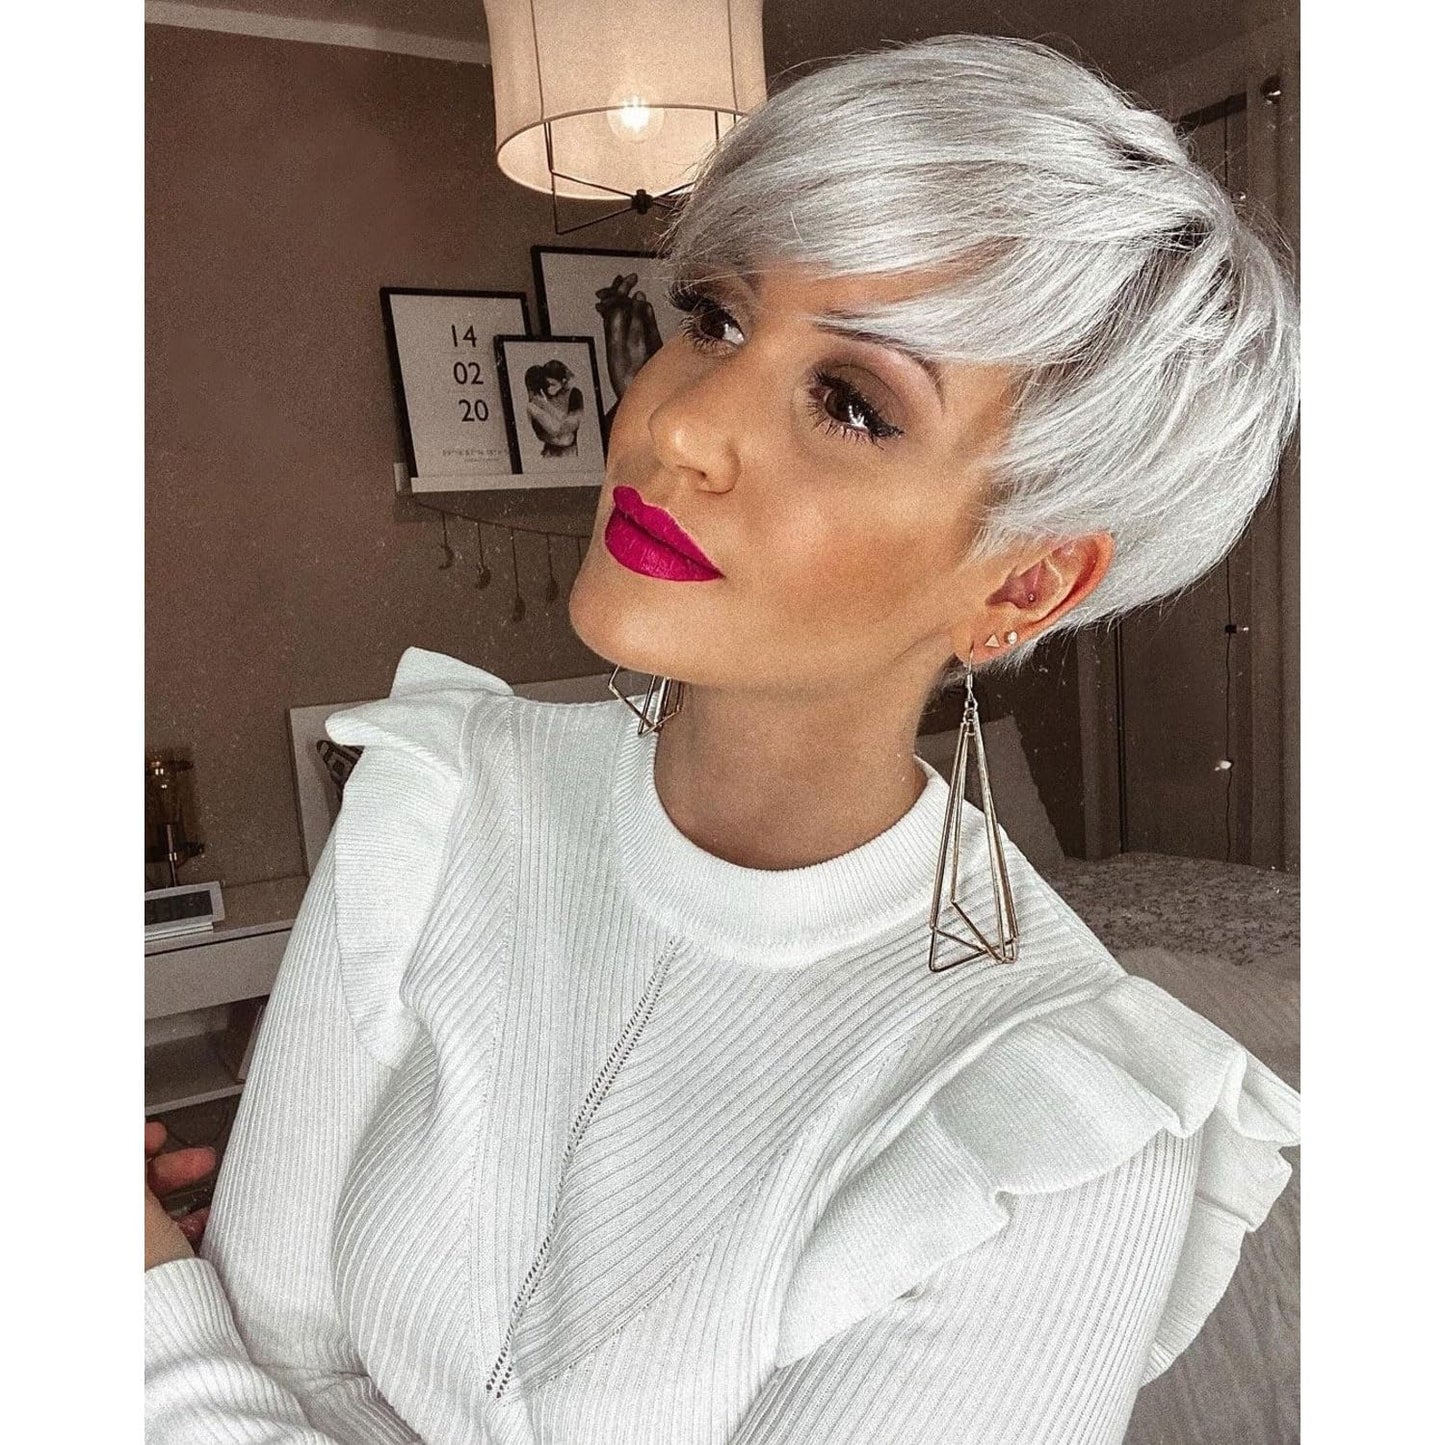 Pixie Cut Wig for Black Women Blonde 613 Short Wig with Bangs Layered Straight Hair Heat Resistant Synthetic Wig for Daily Use(613)